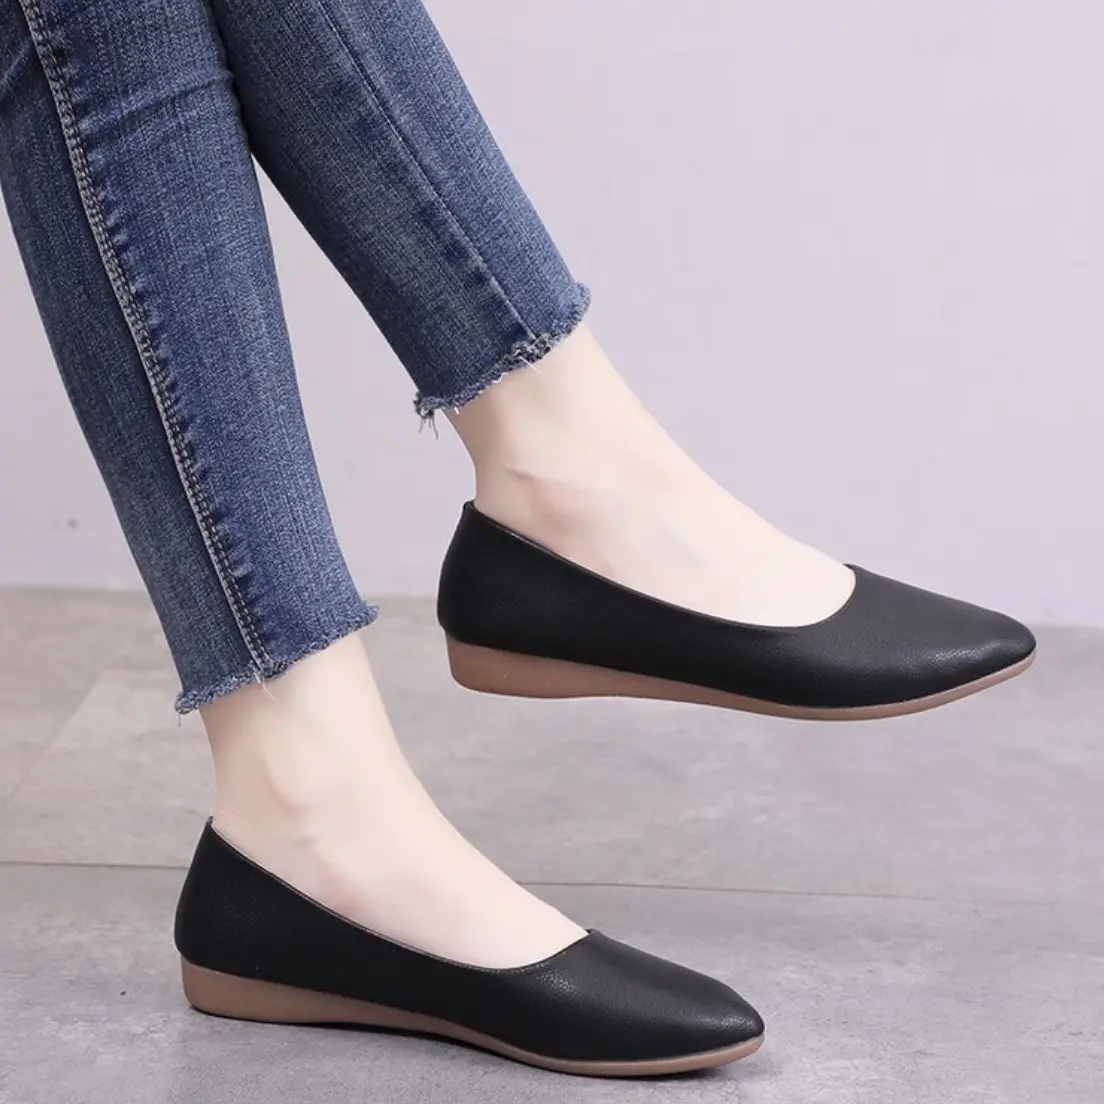 Designer Women Flats Shoes Woman Loafers Spring Autumn Casual Slip On Ladies Ballets Flat Shoes 35-41